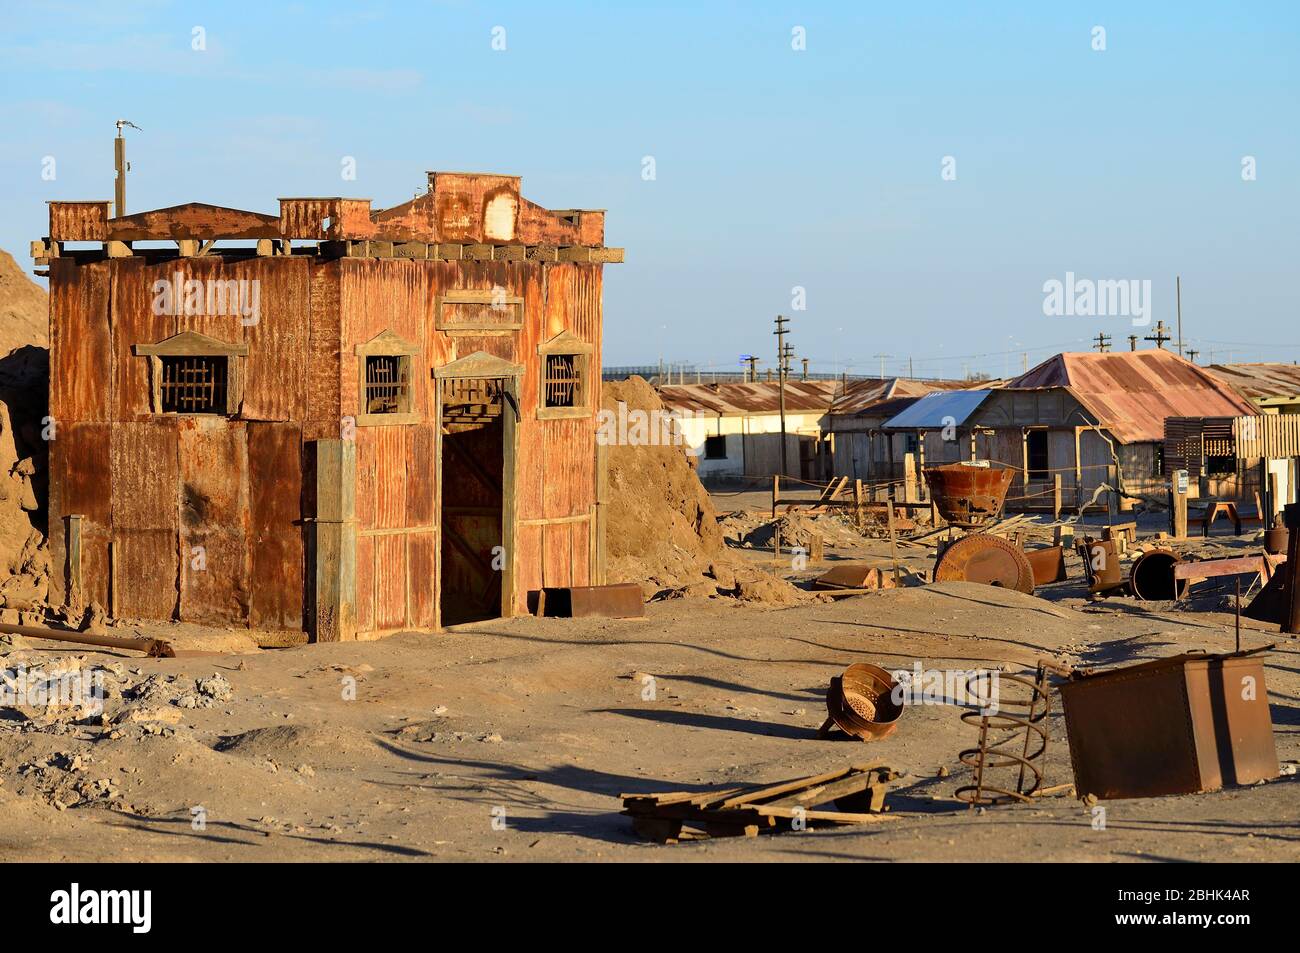 Rusty dilapidated factory building, ghost town Humberstone Saltpetre Works, Tarapaca region, Chile Stock Photo